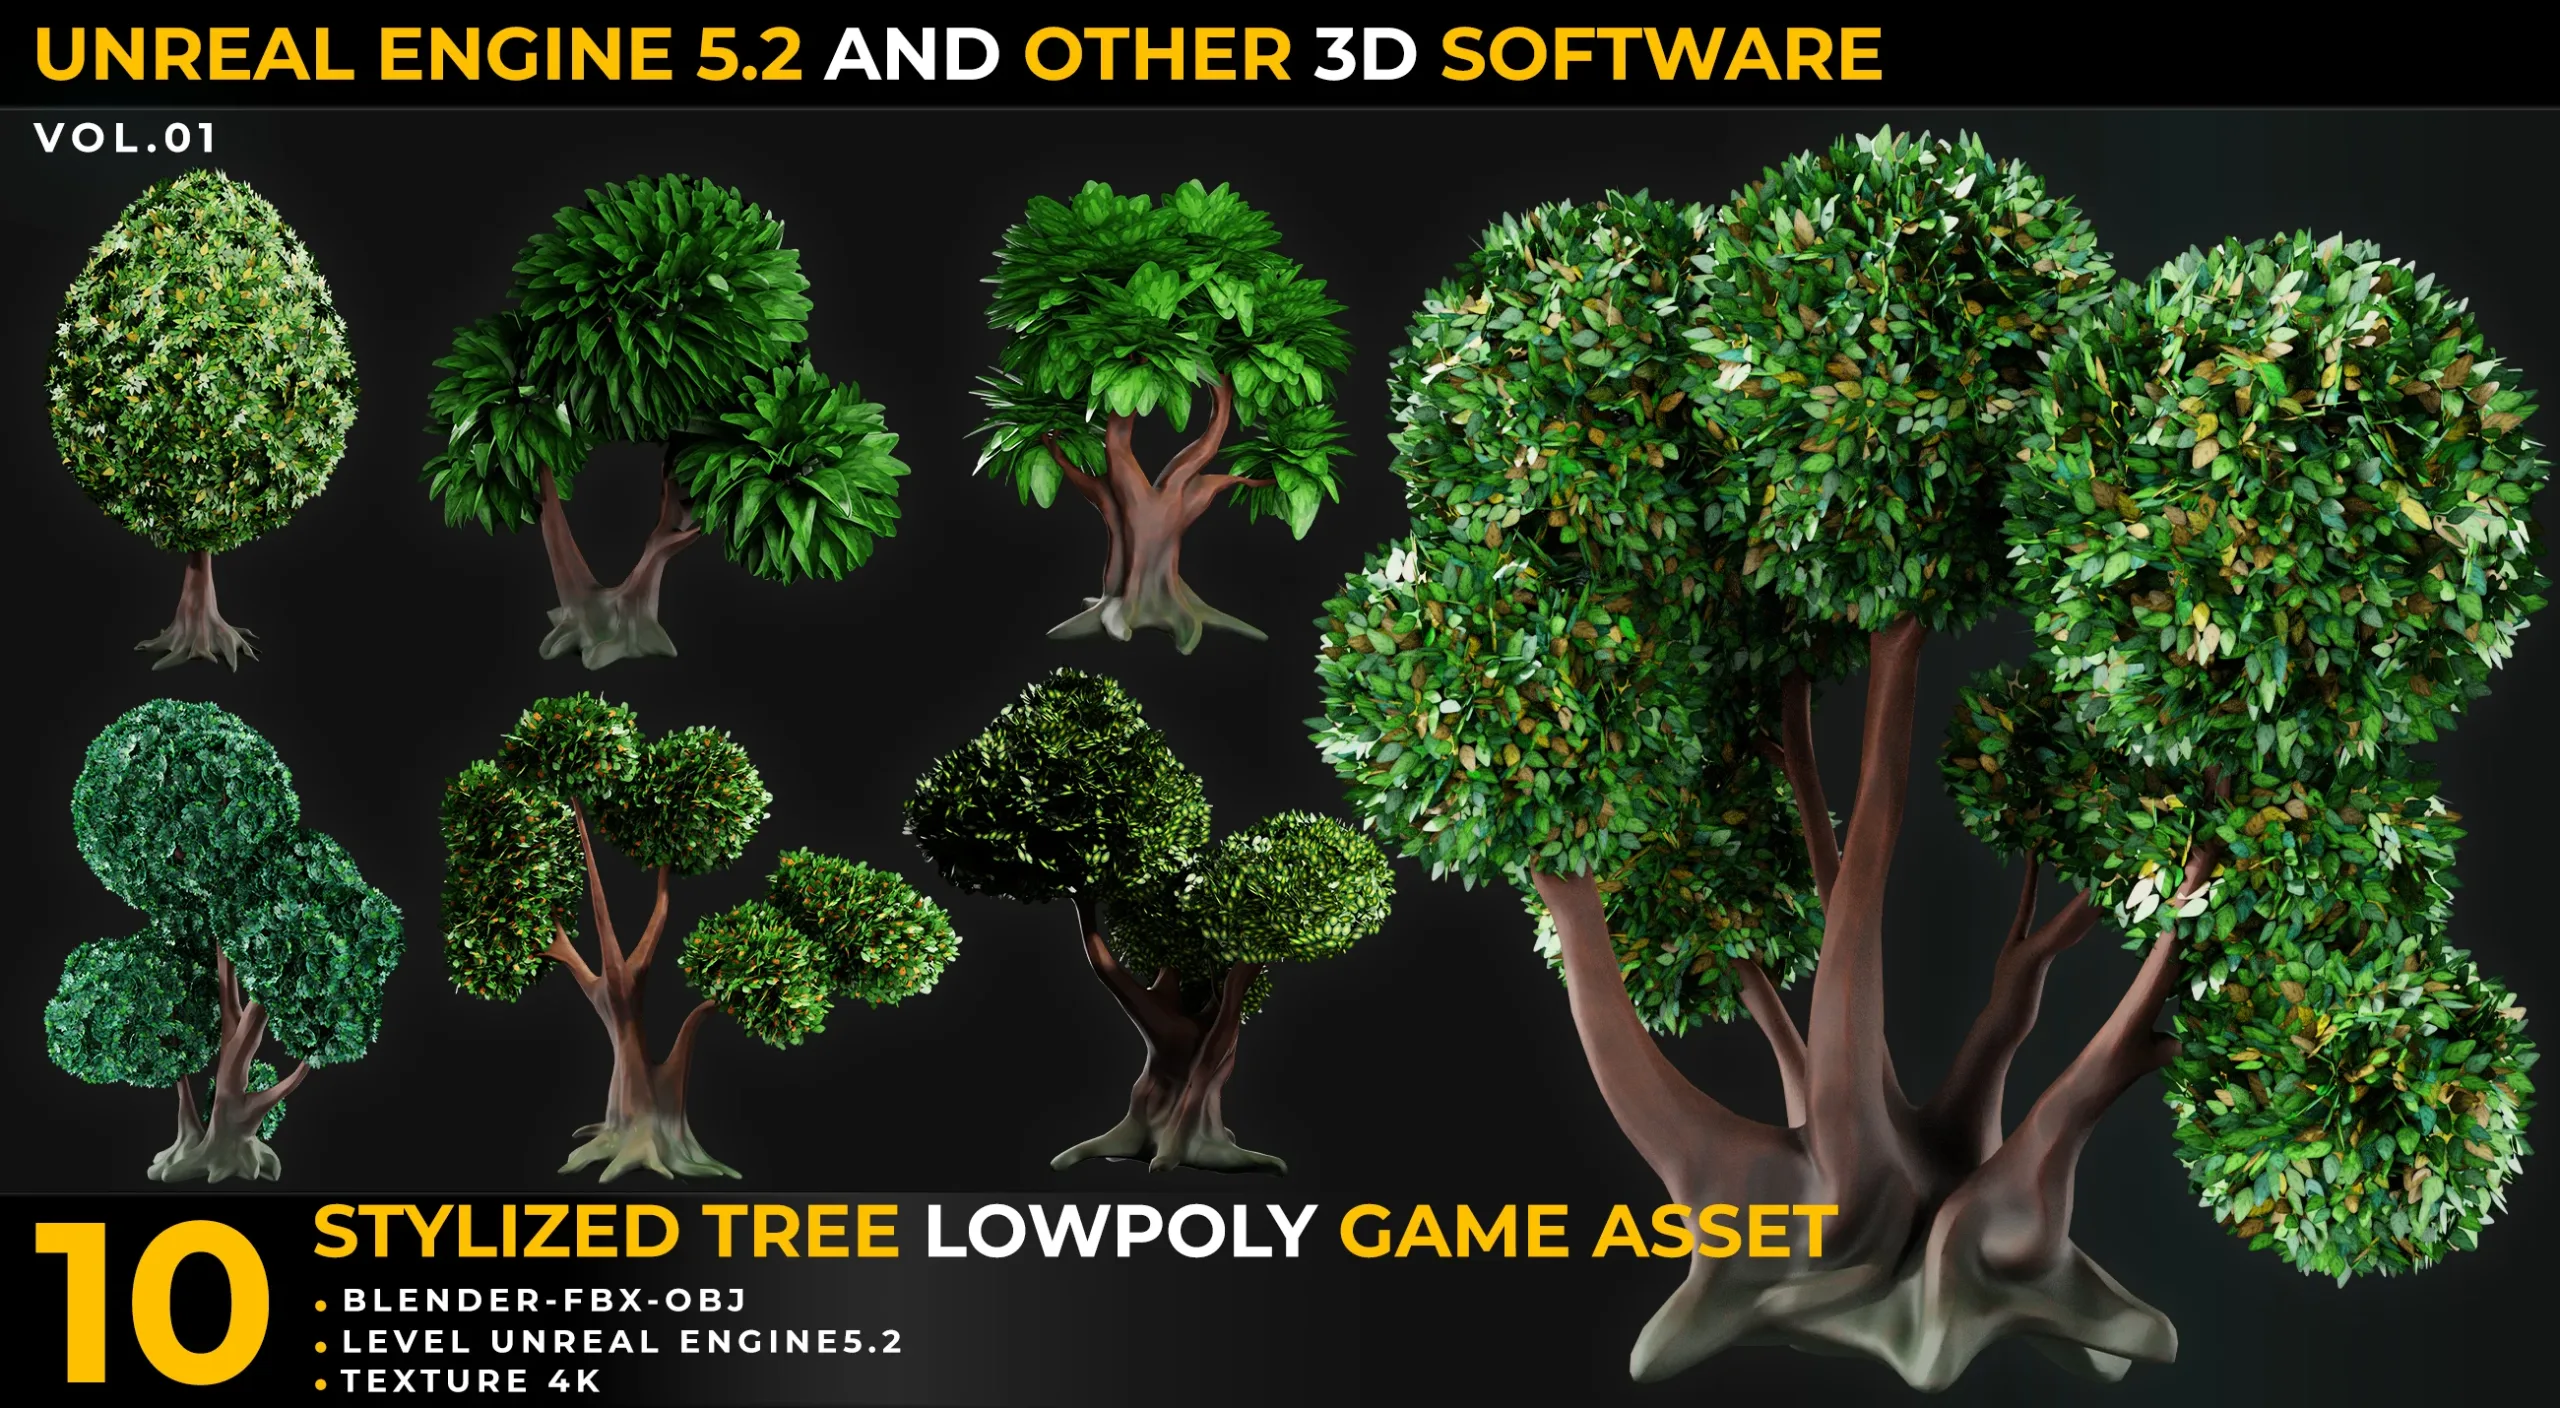 10 Tree Stylize LowPoly GameAsset For UnrealEngine5.2 And Other 3DSoftware